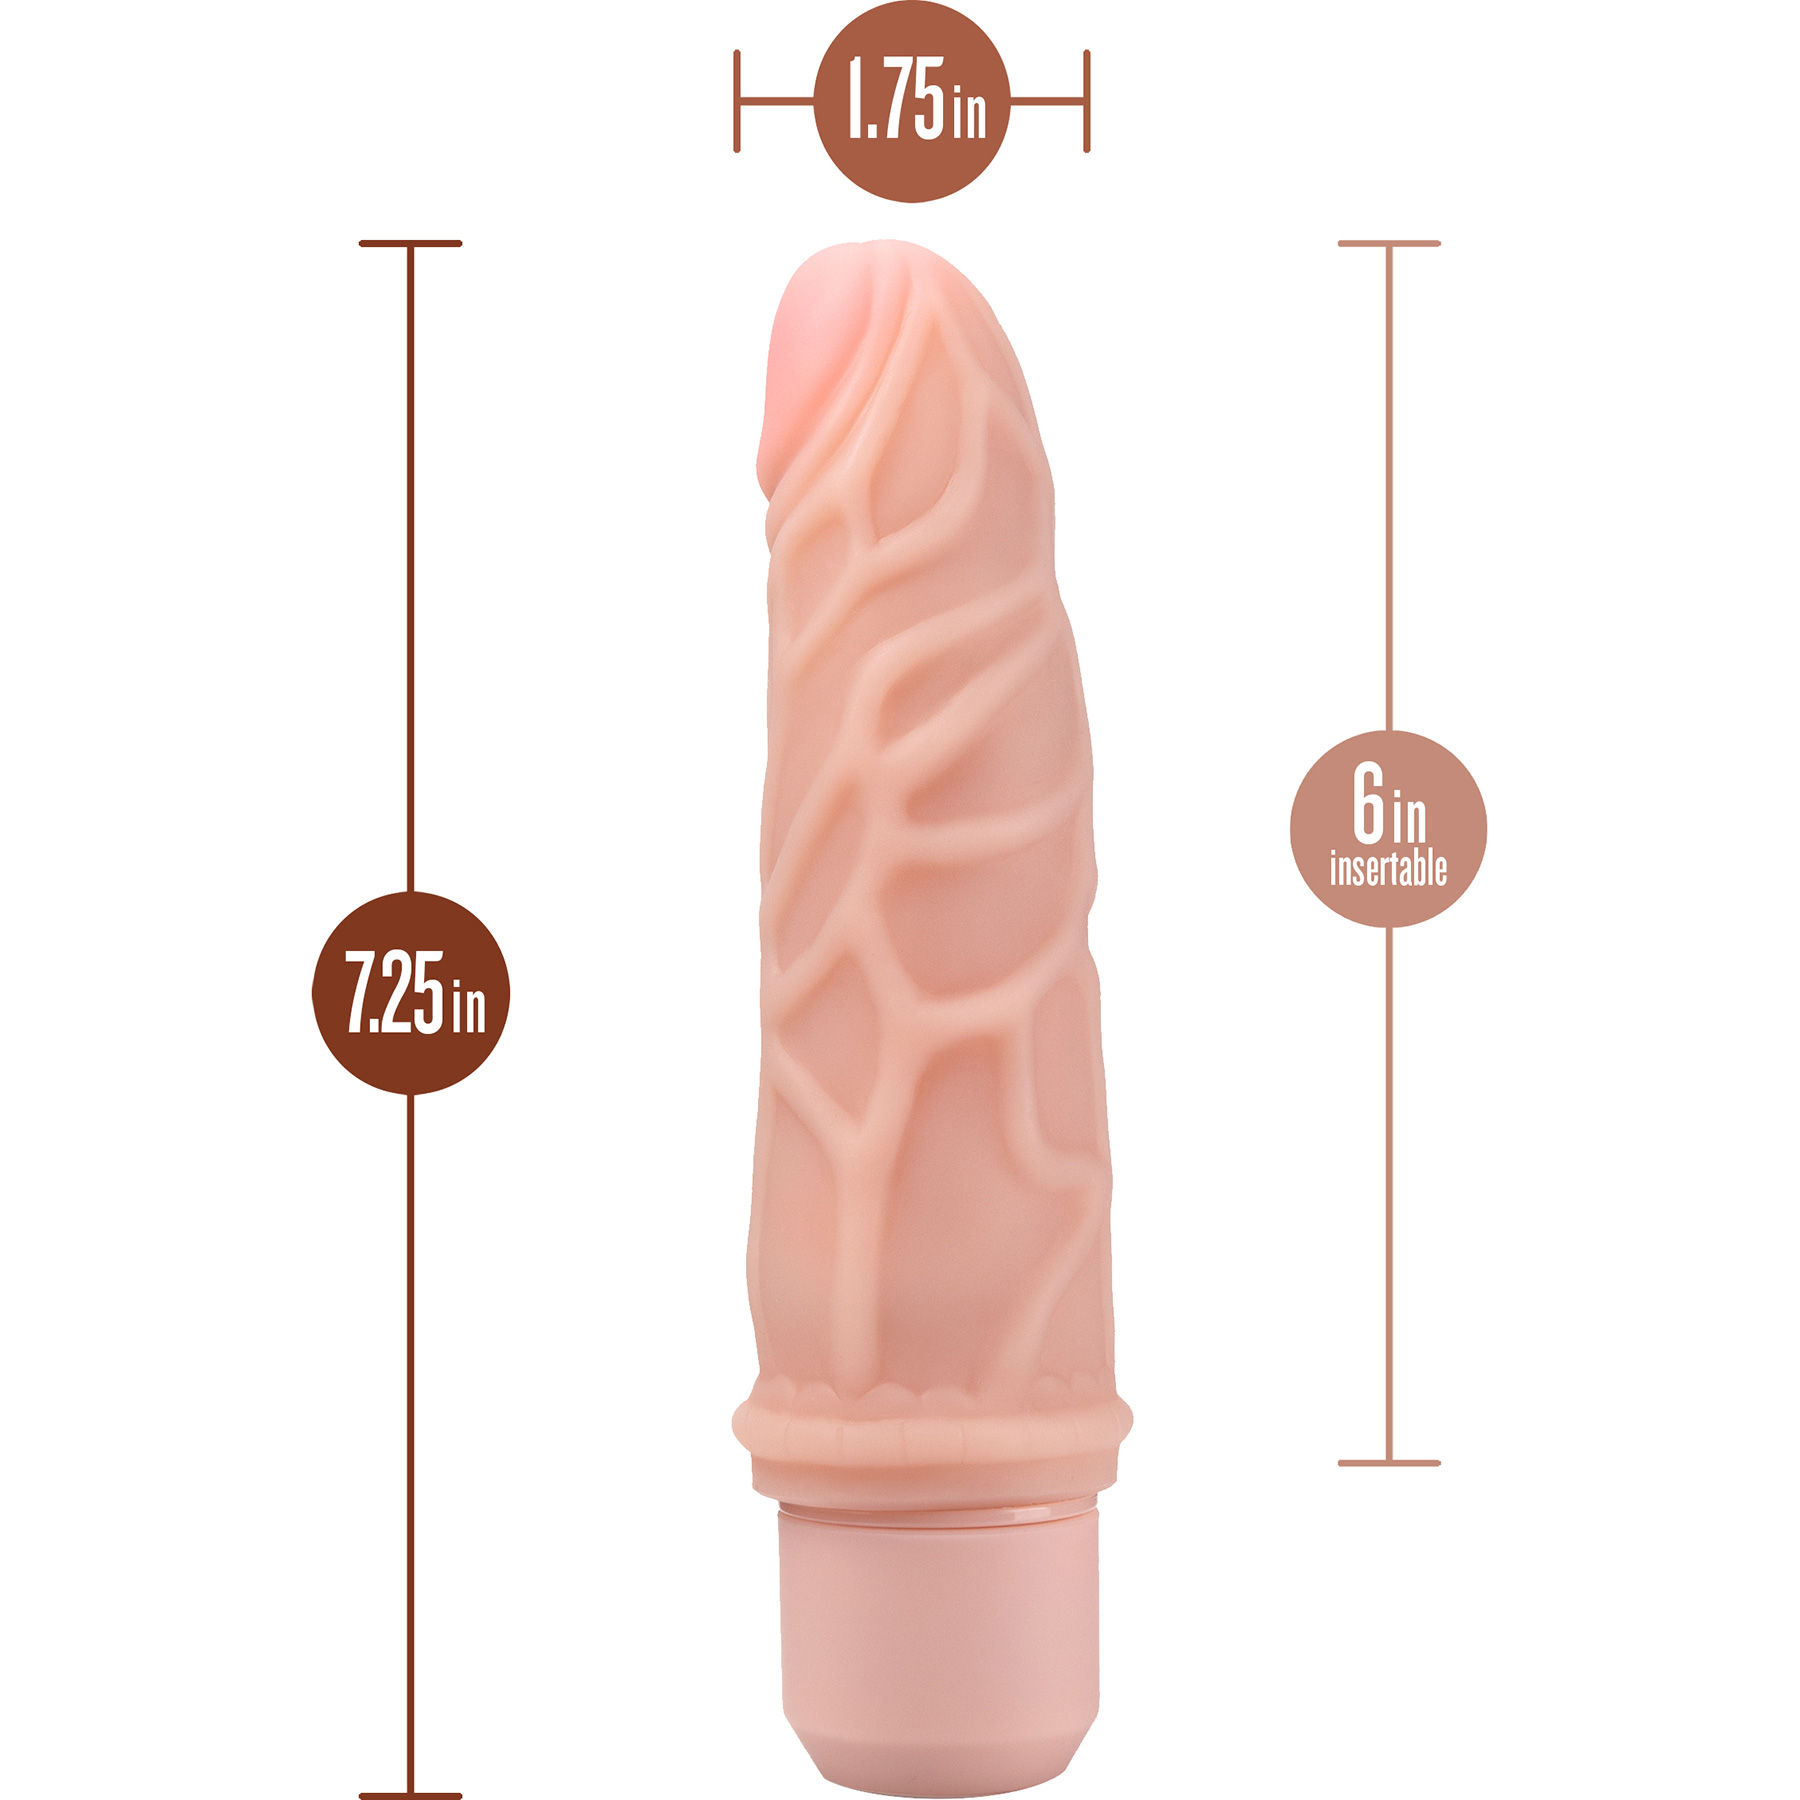 Dr. Skin Silicone Dr. Robert Waterproof Vibrating Dildo 7" By Blush - Measurements